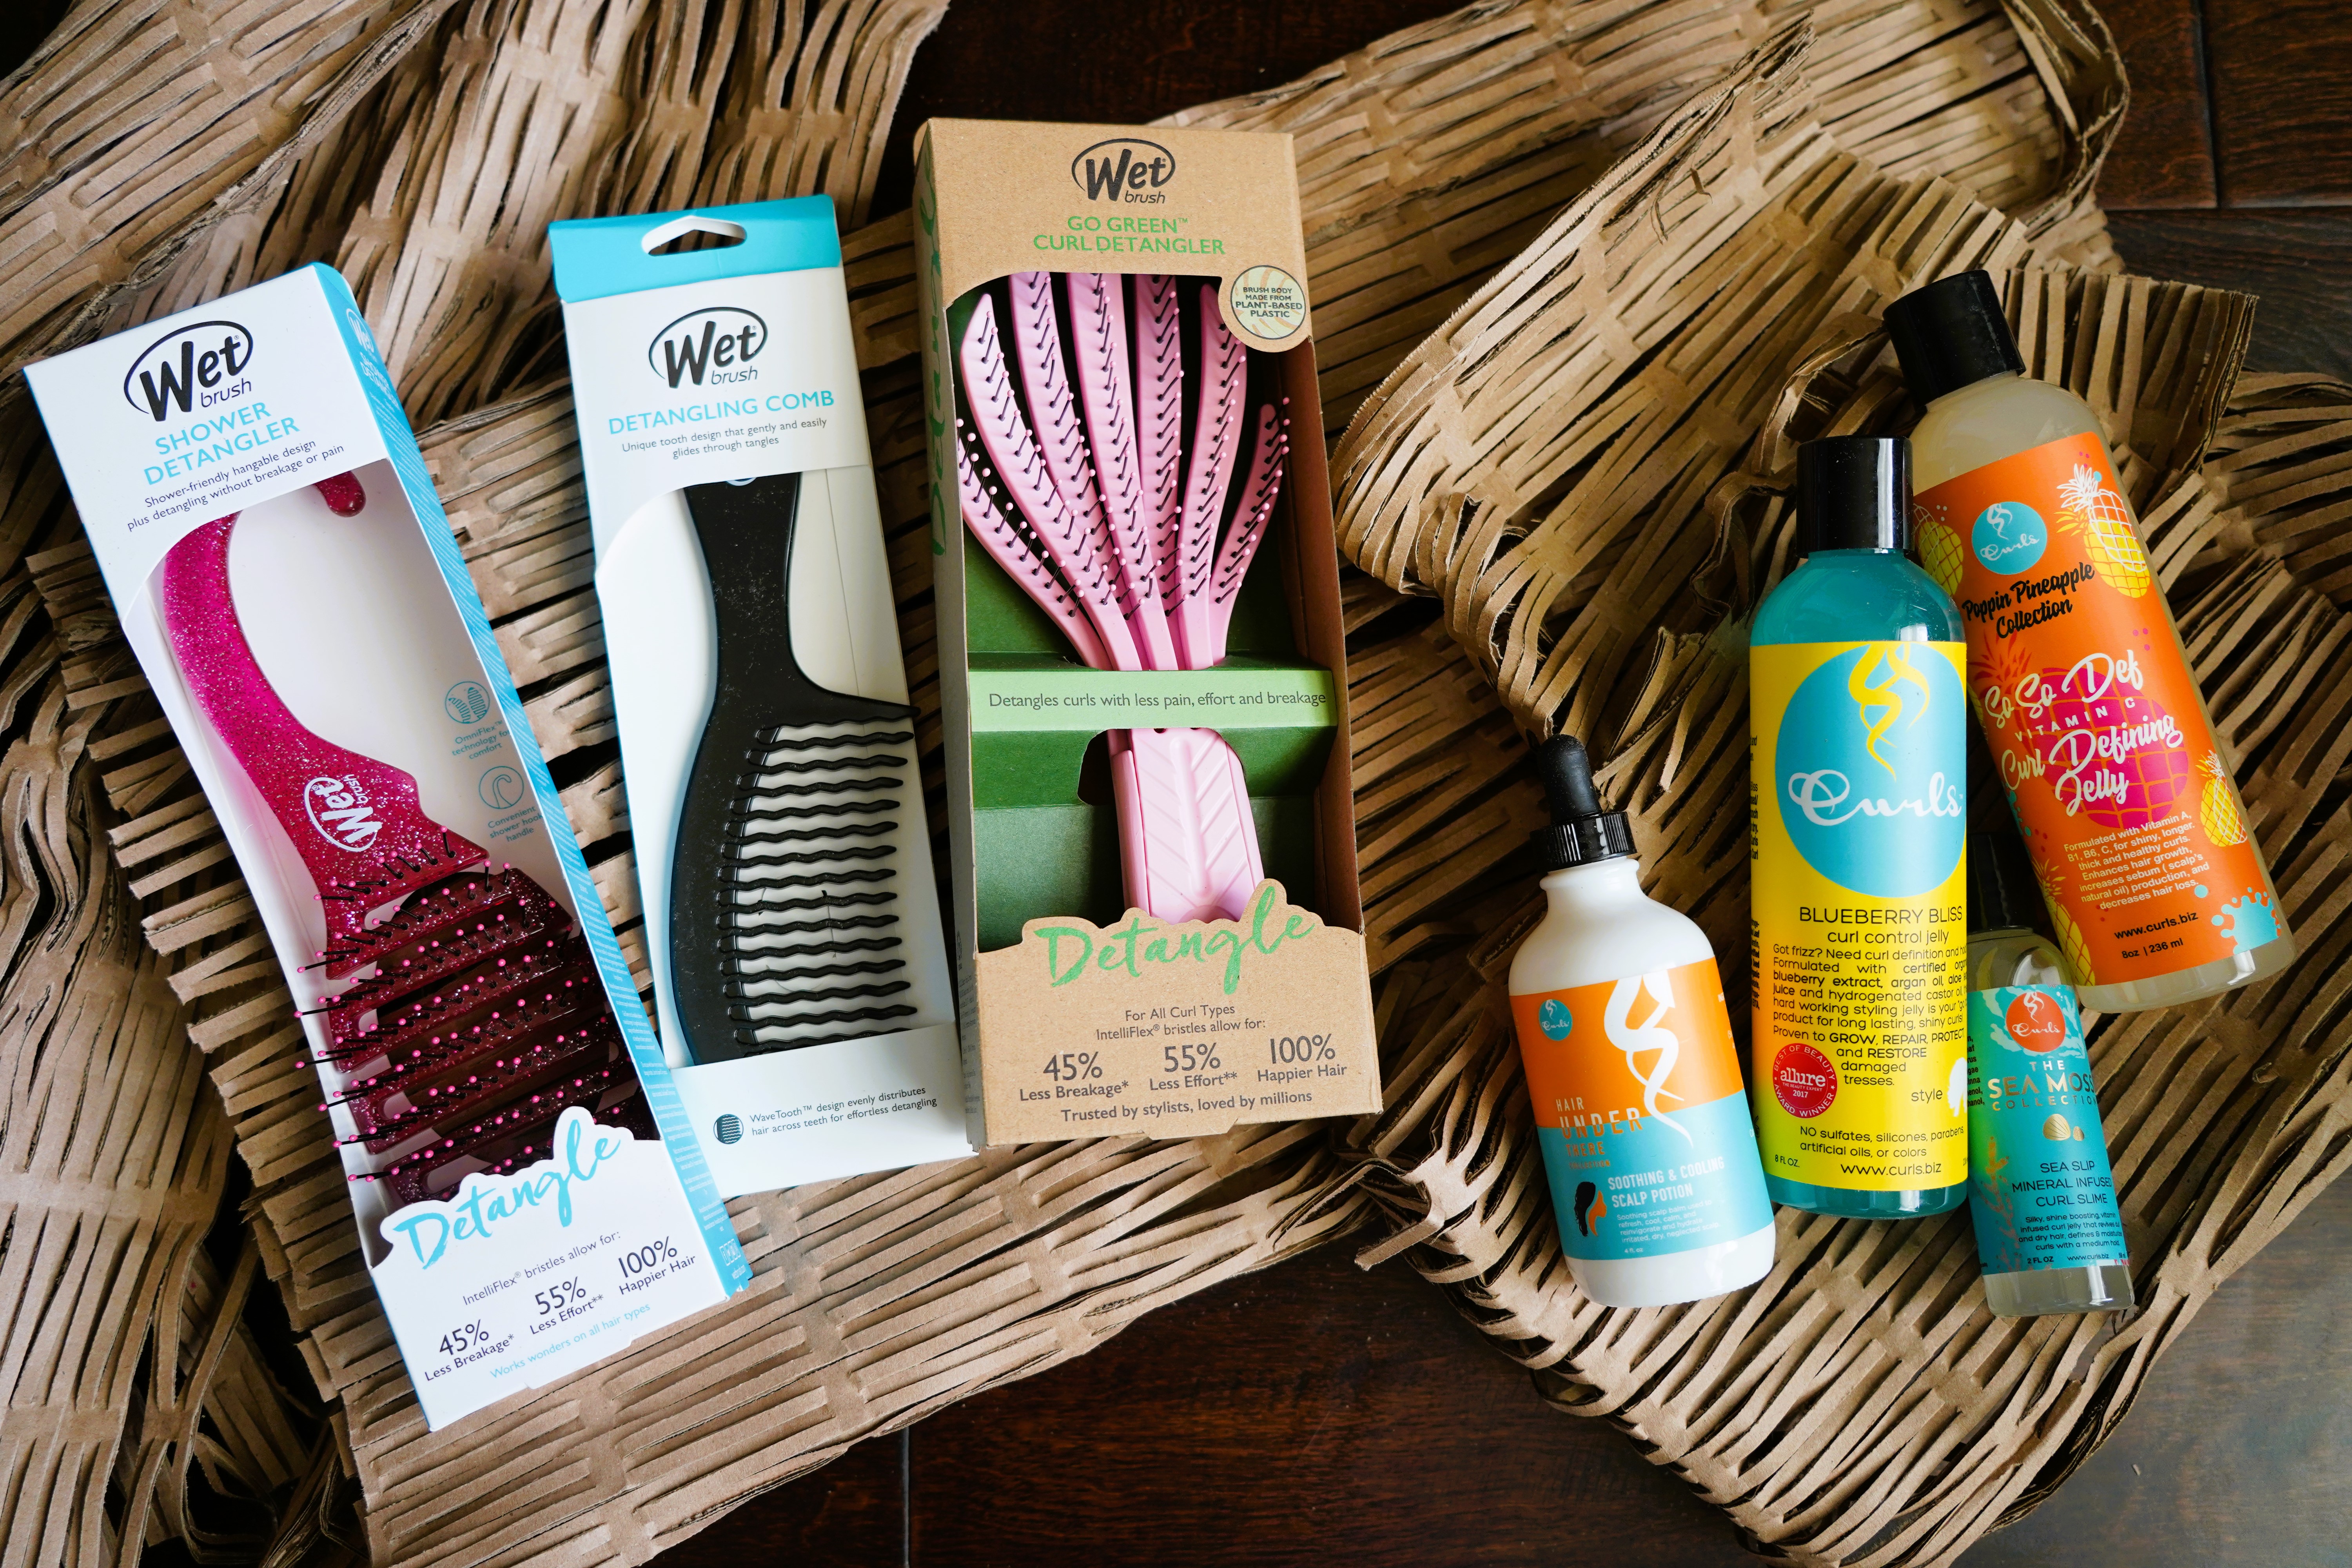 Curls Hair Products and Wet Brush Unboxing: See What I Got!